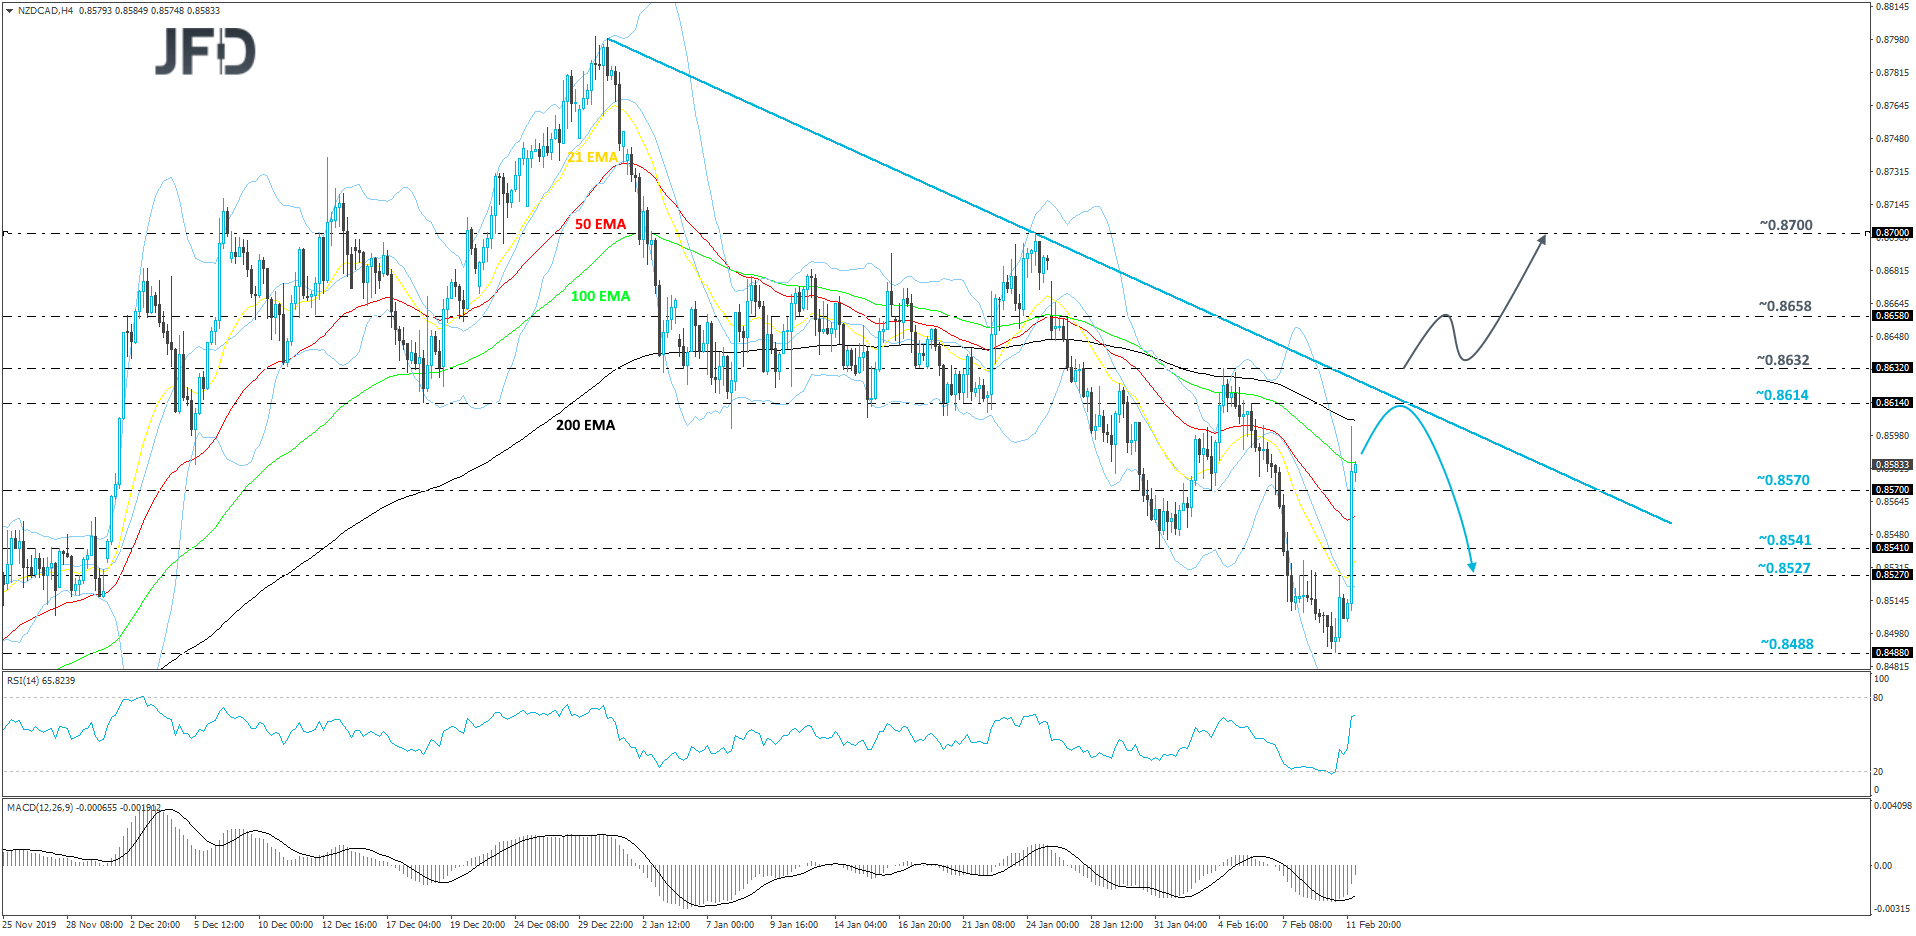 NZD/CAD 4-hour chart technical analysis